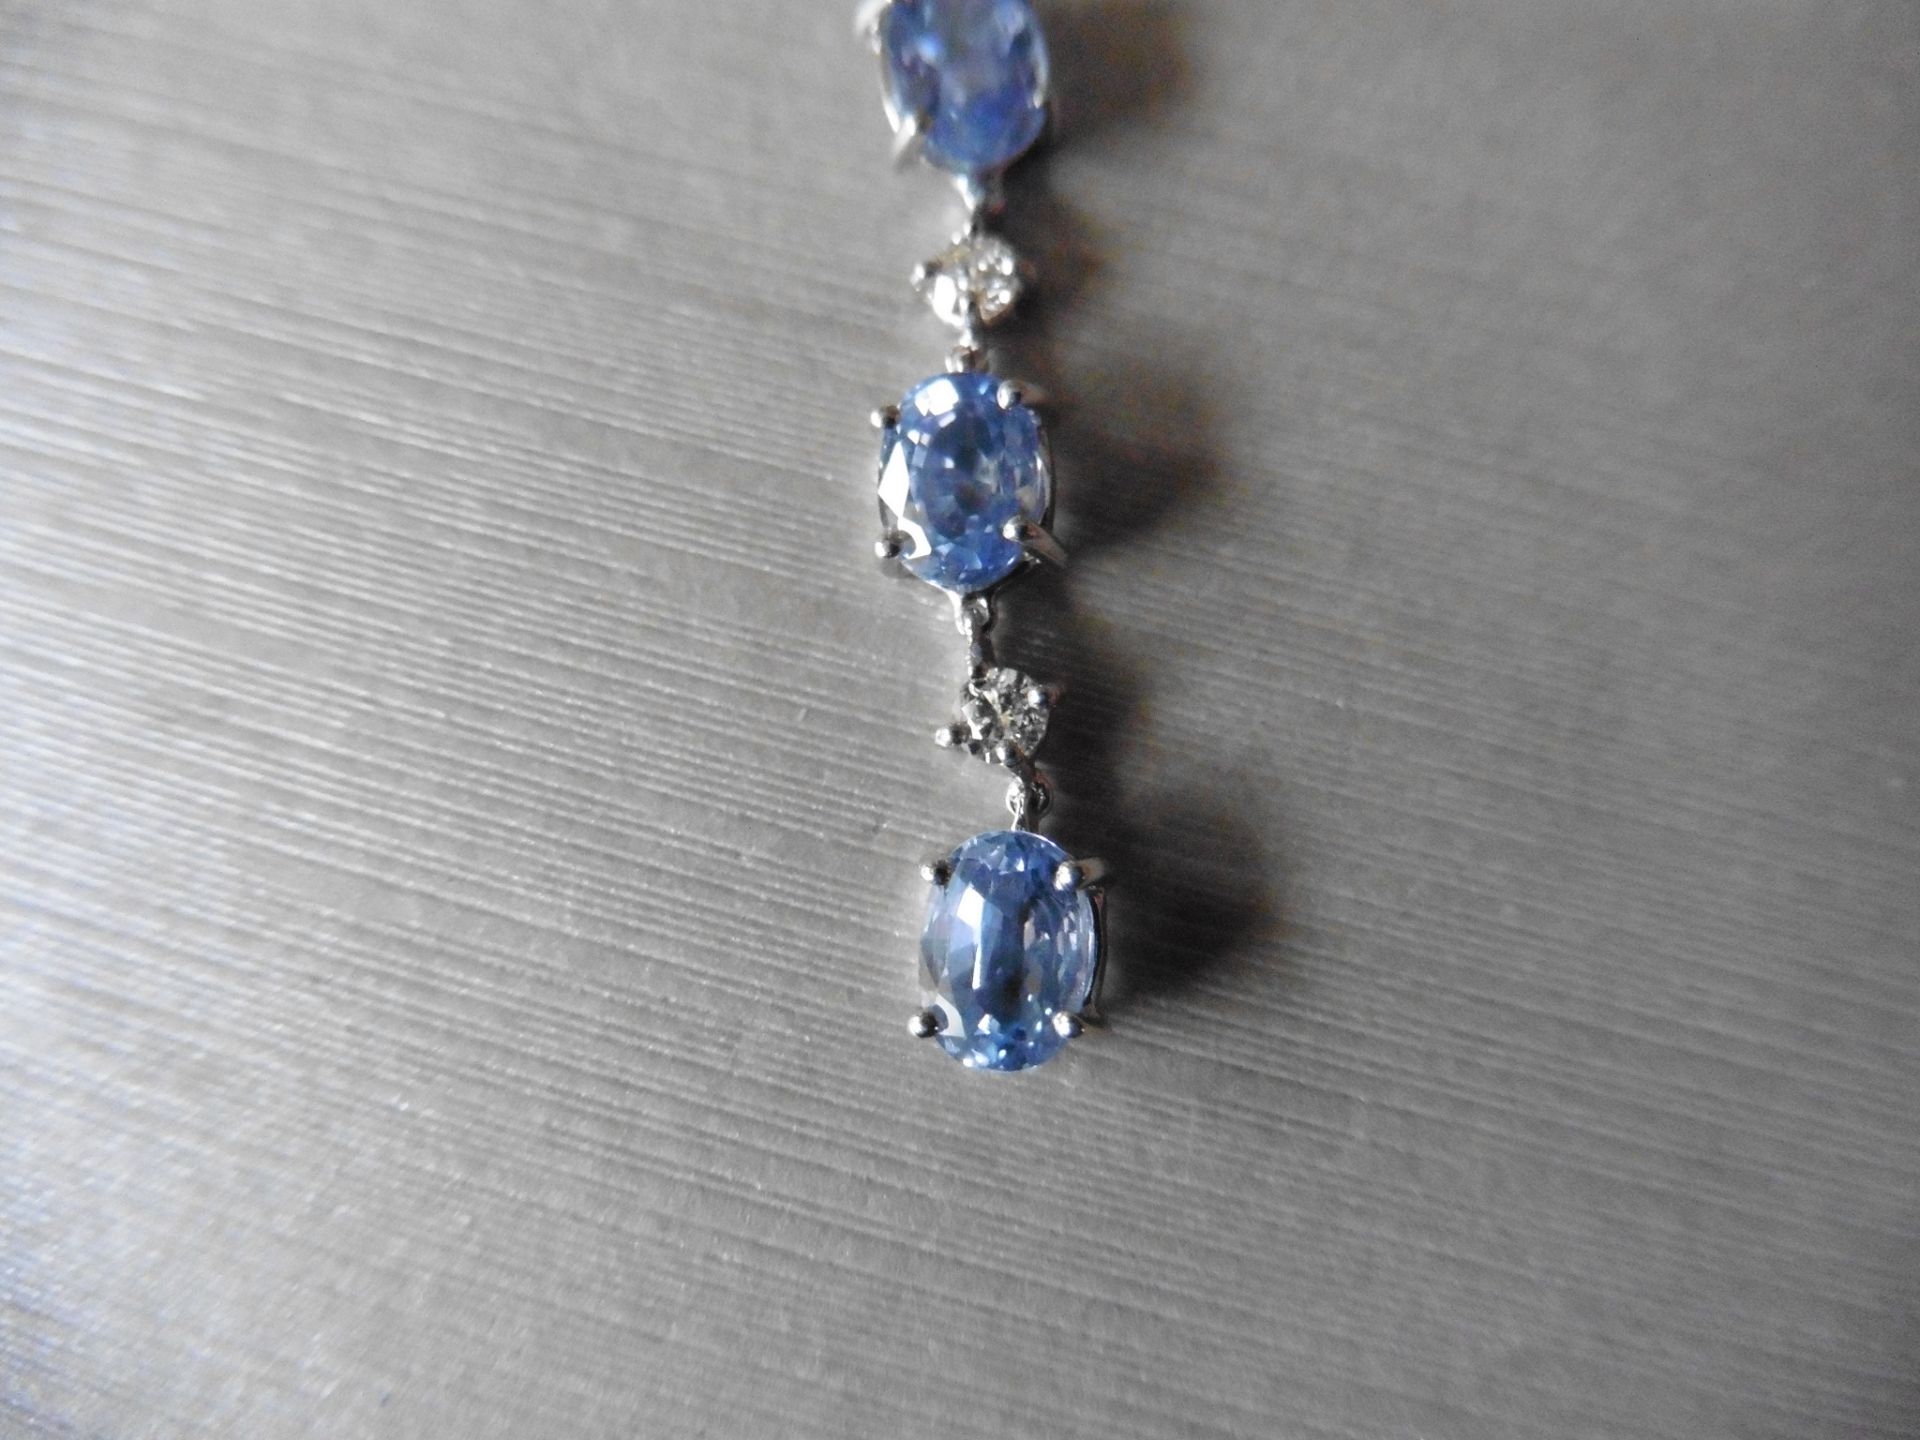 6ct ceylon sapphire and diamond drop earrings. Each set with 4 oval cut sapphires and 3 brilliant - Image 3 of 3